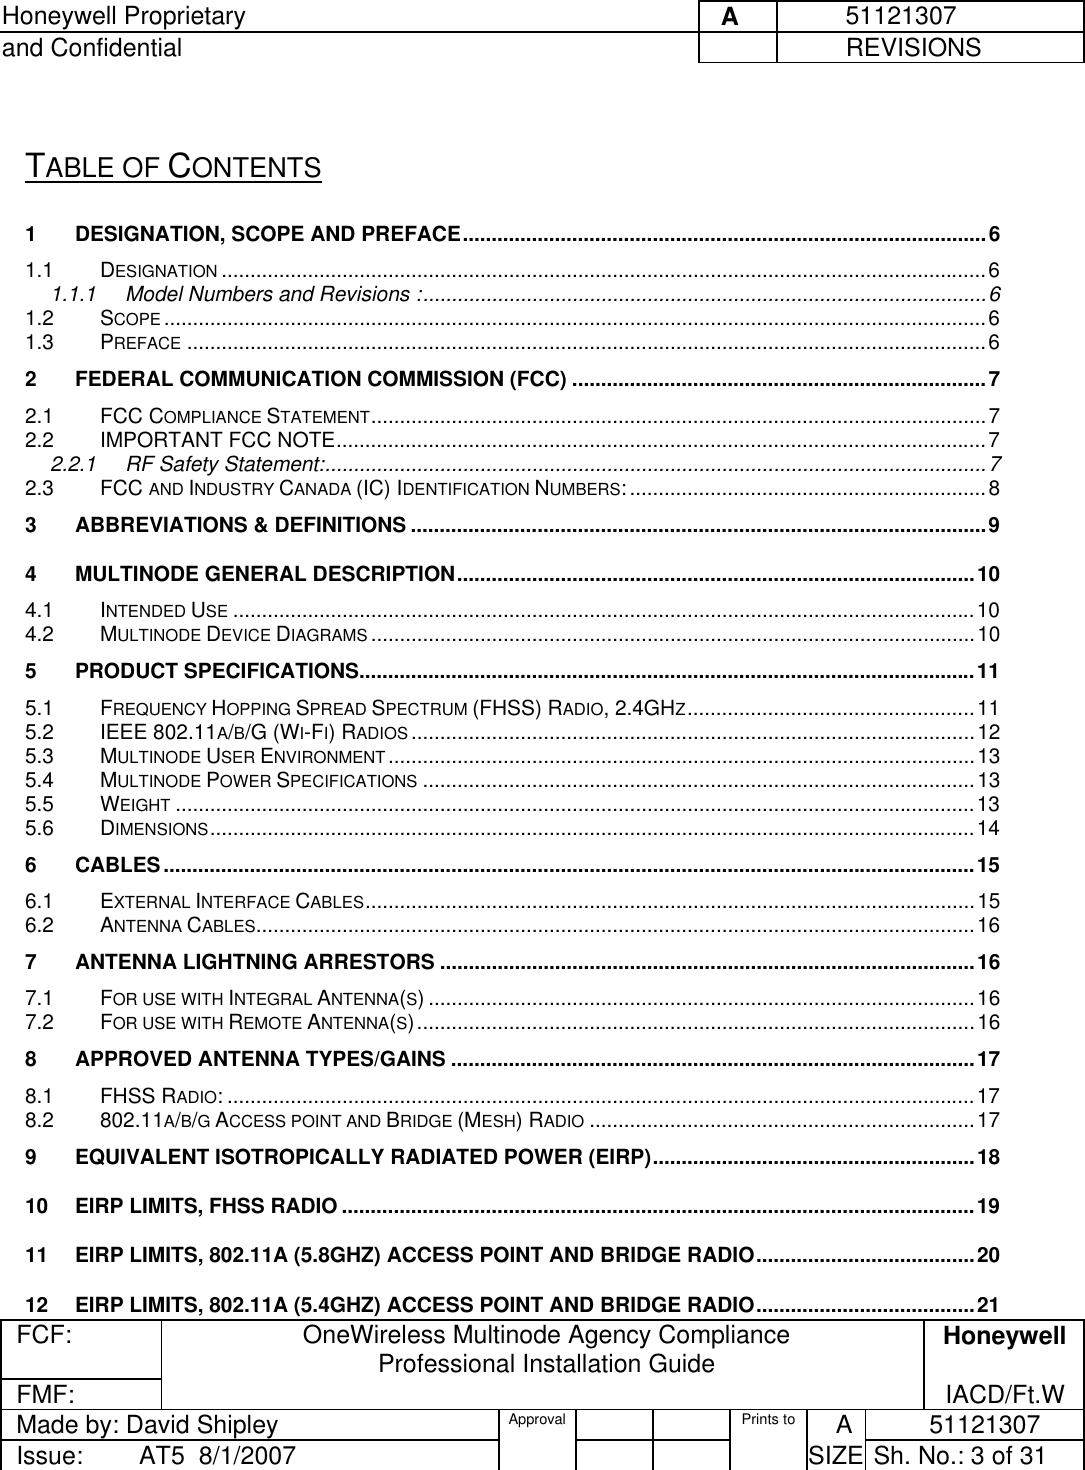 Honeywell Proprietary     A          51121307 and Confidential             REVISIONS  FCF:  OneWireless Multinode Agency Compliance Professional Installation Guide  Honeywell FMF:               IACD/Ft.W Made by: David Shipley  Approval   Prints to     A           51121307 Issue:        AT5  8/1/2007          SIZE  Sh. No.: 3 of 31   TABLE OF CONTENTS 1 DESIGNATION, SCOPE AND PREFACE...........................................................................................6 1.1 DESIGNATION .....................................................................................................................................6 1.1.1 Model Numbers and Revisions :..................................................................................................6 1.2 SCOPE ...............................................................................................................................................6 1.3 PREFACE ...........................................................................................................................................6 2 FEDERAL COMMUNICATION COMMISSION (FCC) ........................................................................7 2.1 FCC COMPLIANCE STATEMENT...........................................................................................................7 2.2 IMPORTANT FCC NOTE.................................................................................................................7 2.2.1 RF Safety Statement:...................................................................................................................7 2.3 FCC AND INDUSTRY CANADA (IC) IDENTIFICATION NUMBERS:..............................................................8 3 ABBREVIATIONS &amp; DEFINITIONS ....................................................................................................9 4 MULTINODE GENERAL DESCRIPTION..........................................................................................10 4.1 INTENDED USE .................................................................................................................................10 4.2 MULTINODE DEVICE DIAGRAMS .........................................................................................................10 5 PRODUCT SPECIFICATIONS...........................................................................................................11 5.1 FREQUENCY HOPPING SPREAD SPECTRUM (FHSS) RADIO, 2.4GHZ..................................................11 5.2 IEEE 802.11A/B/G (WI-FI) RADIOS ..................................................................................................12 5.3 MULTINODE USER ENVIRONMENT......................................................................................................13 5.4 MULTINODE POWER SPECIFICATIONS ................................................................................................13 5.5 WEIGHT ...........................................................................................................................................13 5.6 DIMENSIONS.....................................................................................................................................14 6 CABLES.............................................................................................................................................15 6.1 EXTERNAL INTERFACE CABLES..........................................................................................................15 6.2 ANTENNA CABLES.............................................................................................................................16 7 ANTENNA LIGHTNING ARRESTORS .............................................................................................16 7.1 FOR USE WITH INTEGRAL ANTENNA(S) ...............................................................................................16 7.2 FOR USE WITH REMOTE ANTENNA(S).................................................................................................16 8 APPROVED ANTENNA TYPES/GAINS ...........................................................................................17 8.1 FHSS RADIO: ..................................................................................................................................17 8.2 802.11A/B/G ACCESS POINT AND BRIDGE (MESH) RADIO ...................................................................17 9 EQUIVALENT ISOTROPICALLY RADIATED POWER (EIRP)........................................................18 10 EIRP LIMITS, FHSS RADIO ..............................................................................................................19 11 EIRP LIMITS, 802.11A (5.8GHZ) ACCESS POINT AND BRIDGE RADIO......................................20 12 EIRP LIMITS, 802.11A (5.4GHZ) ACCESS POINT AND BRIDGE RADIO......................................21 